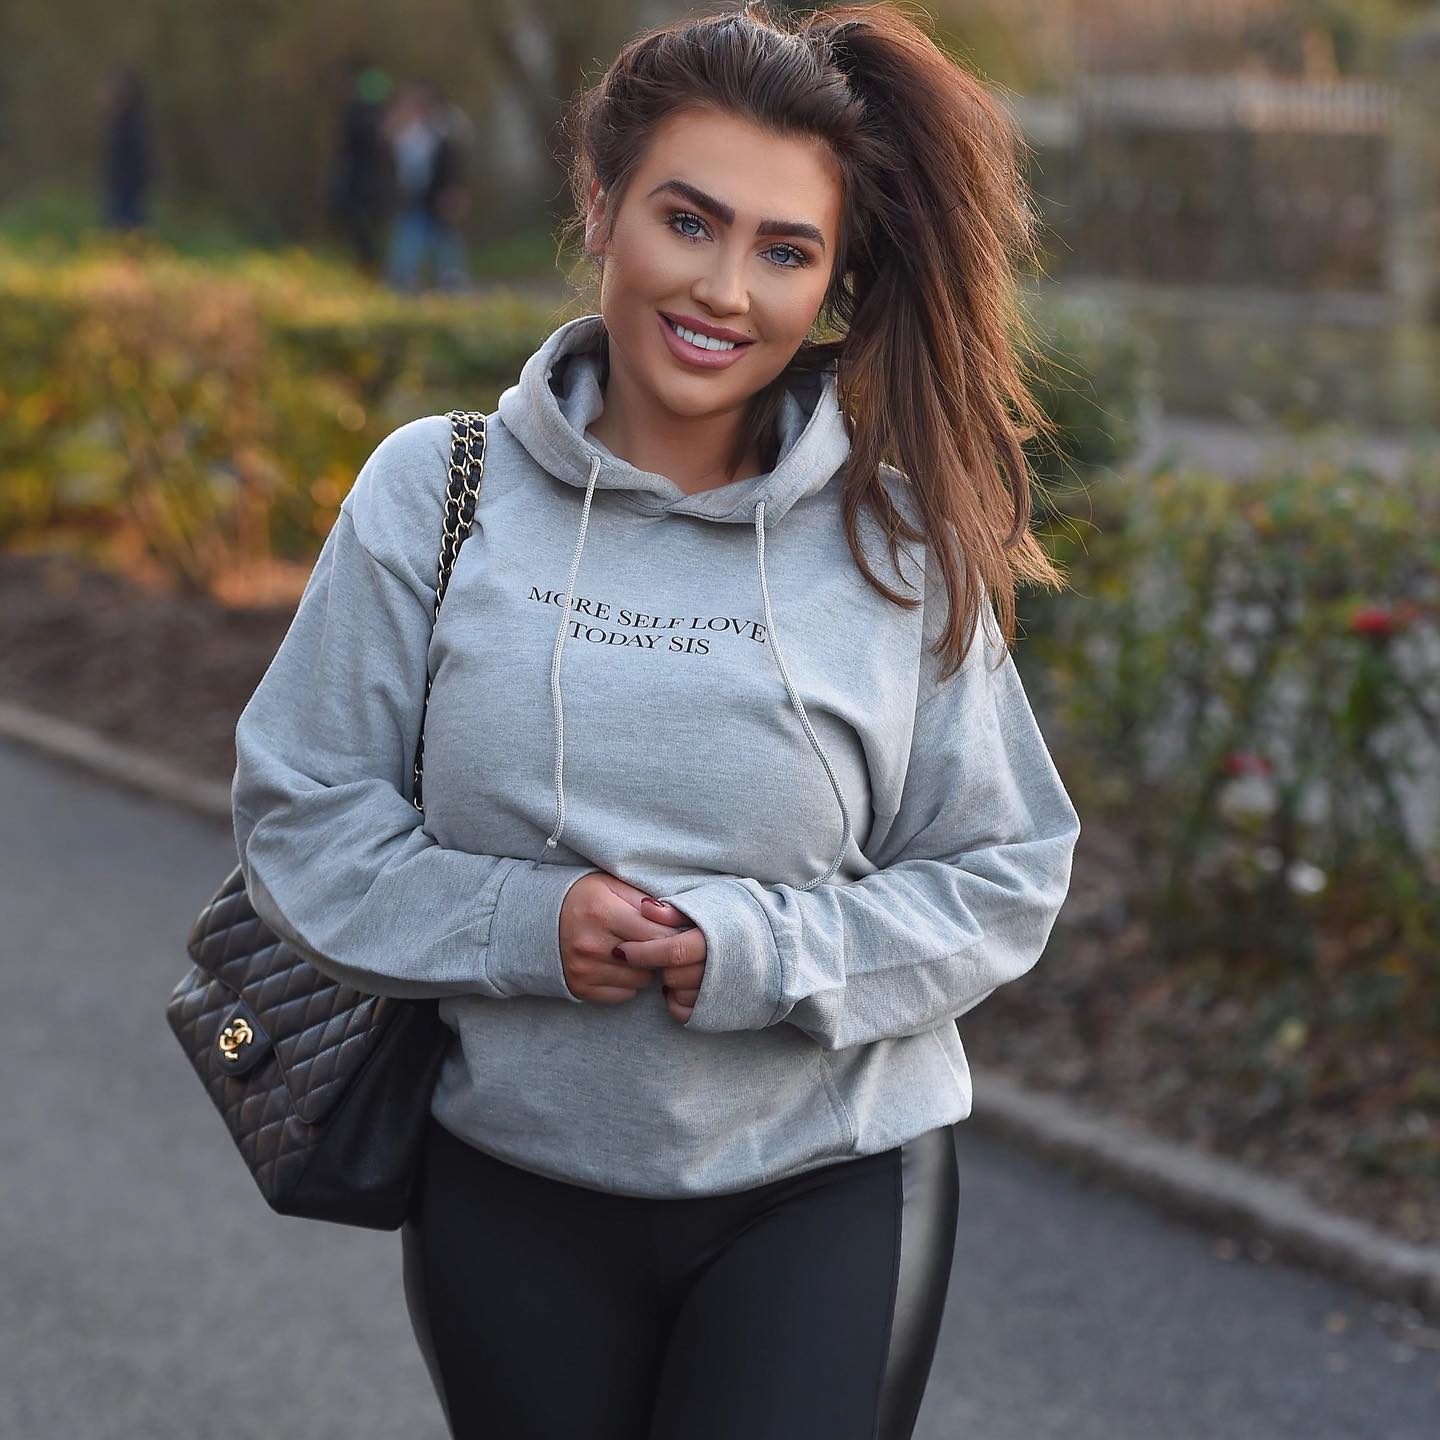 Lauren Goodger is 'Unrecognisable' After an 'Attack'